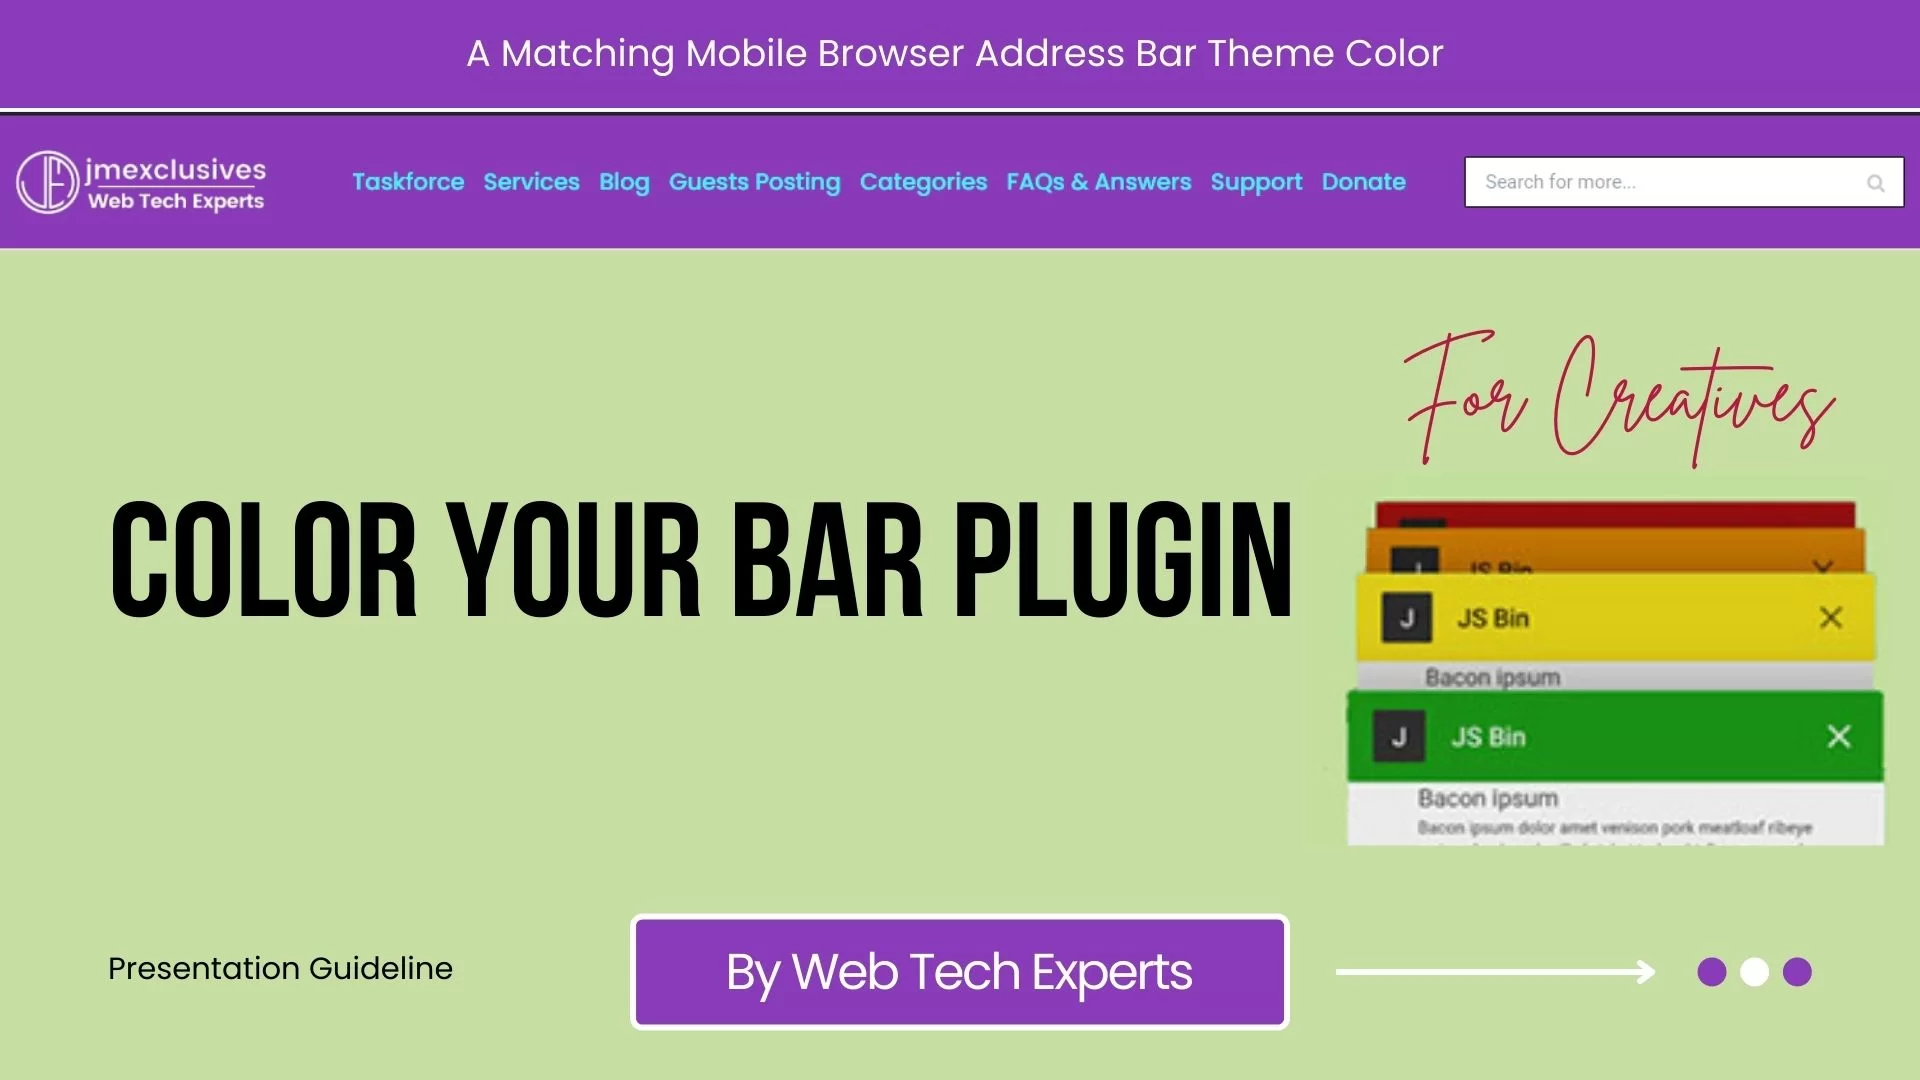 How The Color Your Bar Plugin Works